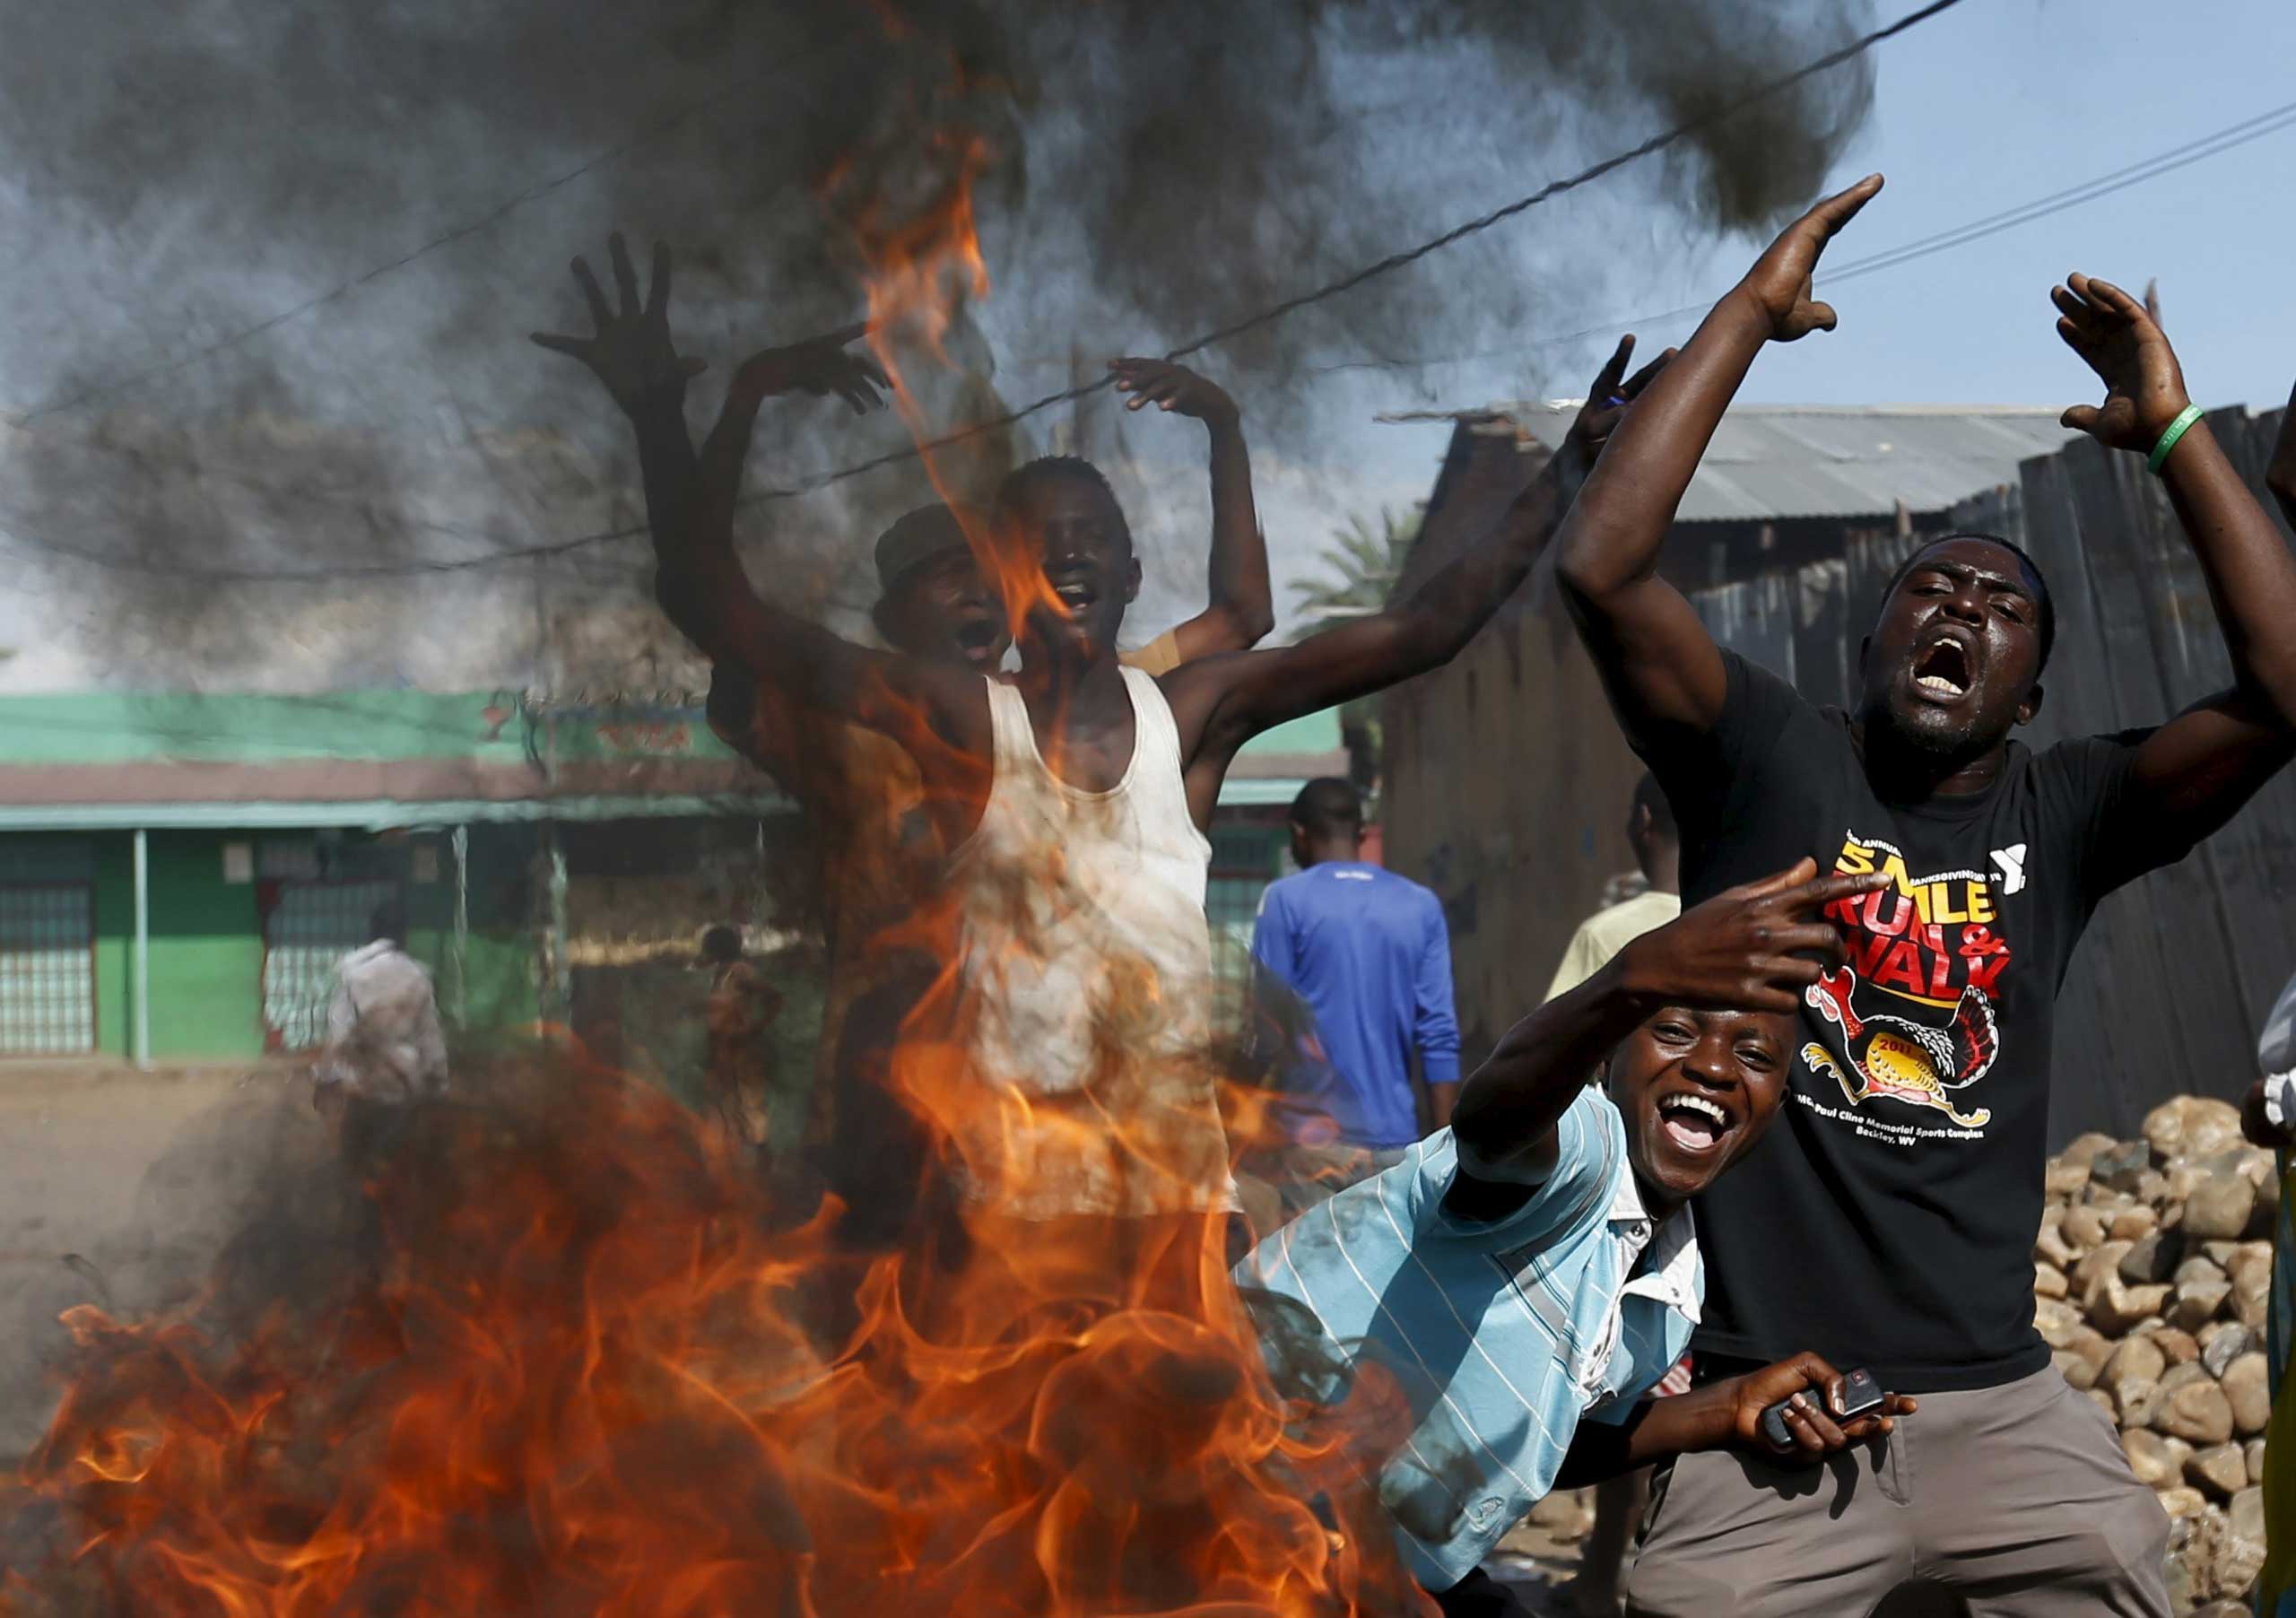 Protesters, who are against President Pierre Nkurunziza's decision to run for a third term, gesture in front of a burning barricade in Bujumbura, Burundi on May 14, 2015. (Goran Tomasevic—Reuters)